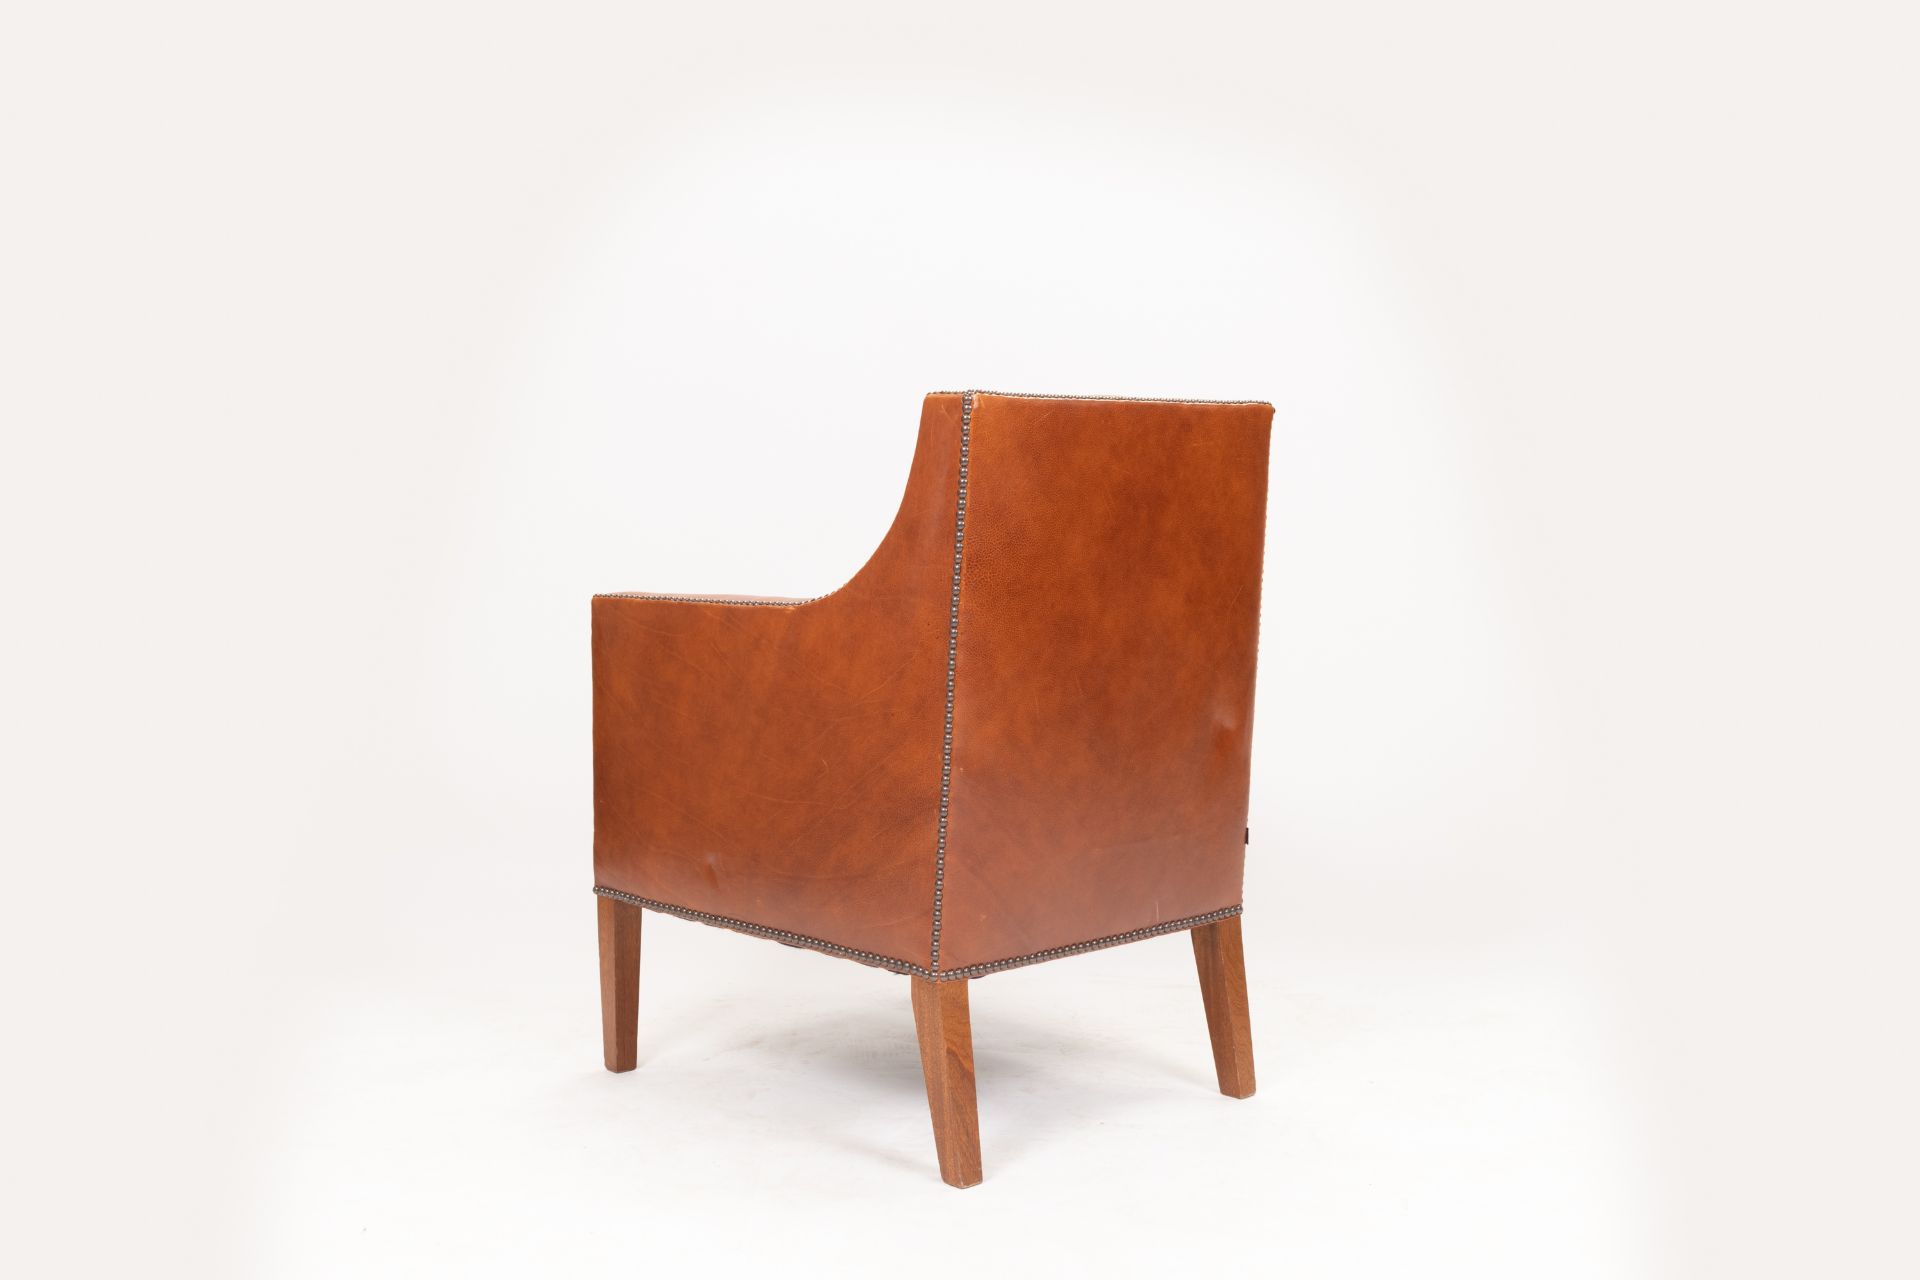 David Linley Lord Nelson Armchair - Image 6 of 9